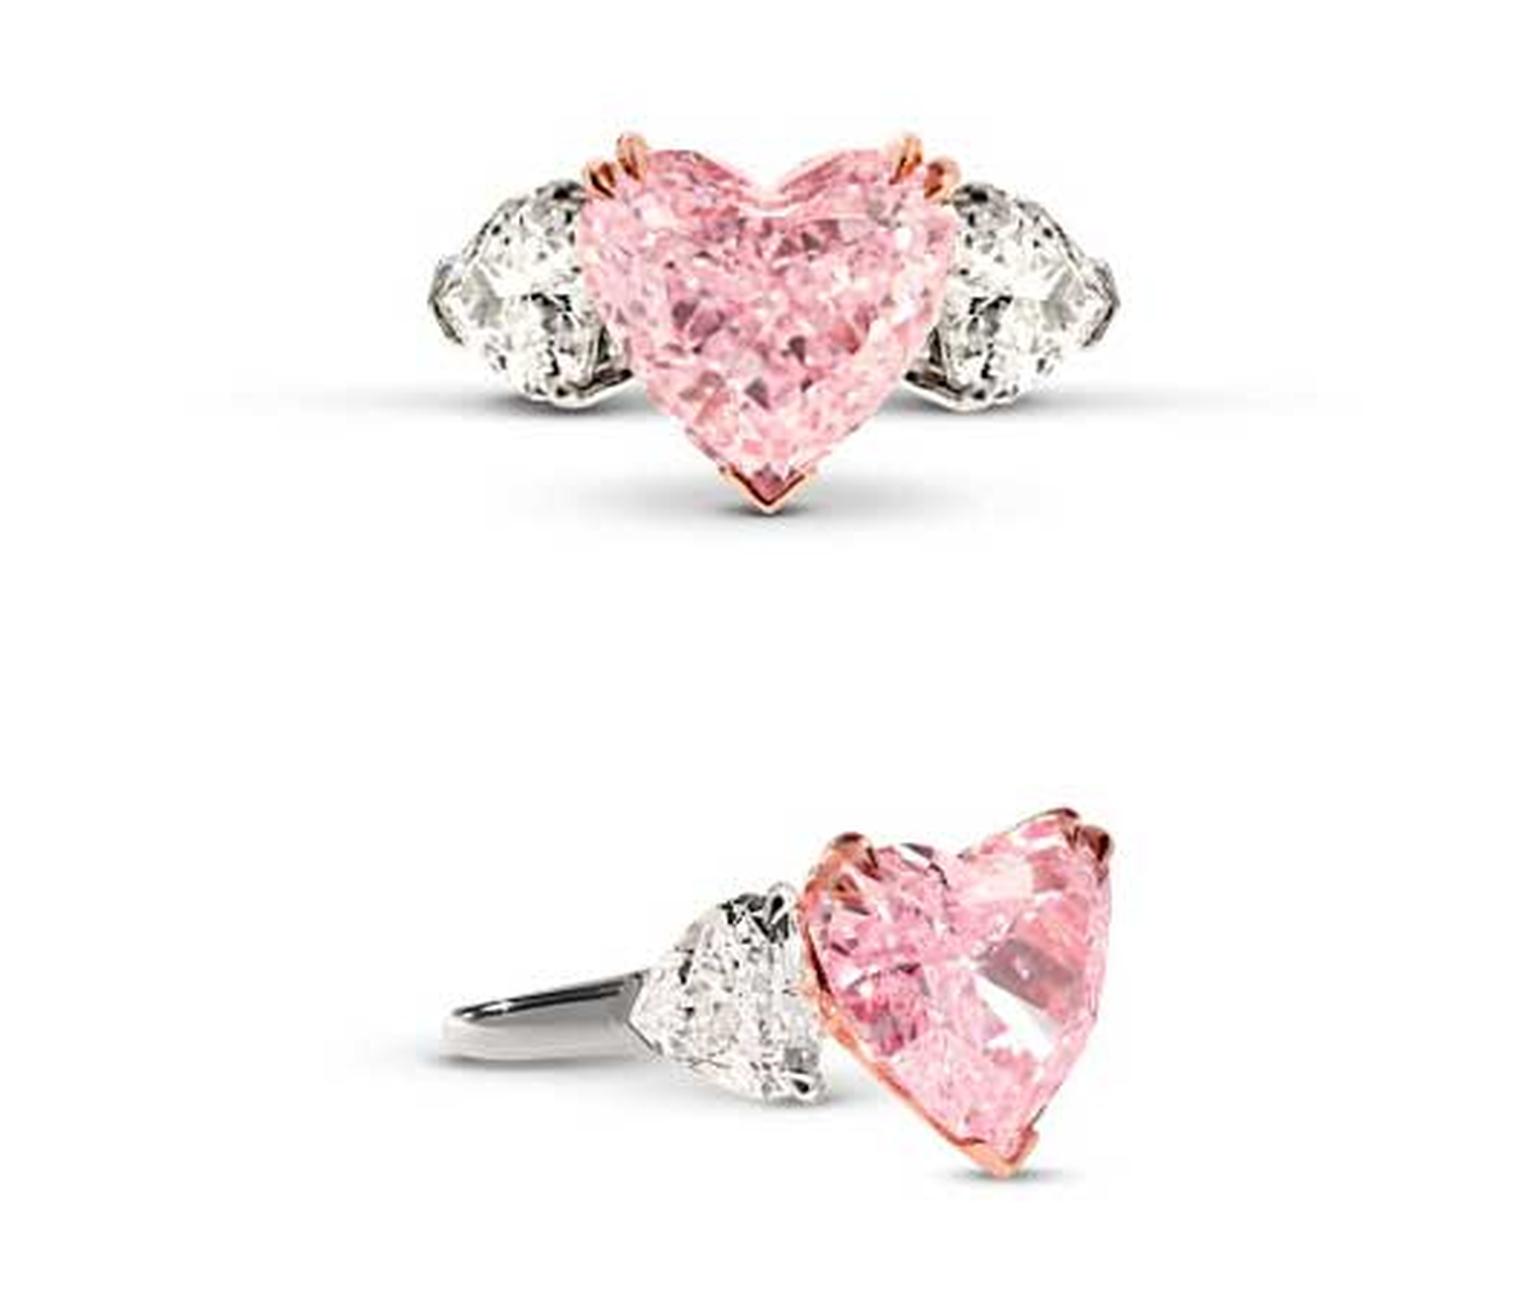 Star Diamond pink diamond engagement ring, set with a 5.32ct heart-shaped Intense pink diamond, flanked on either side by white diamonds.